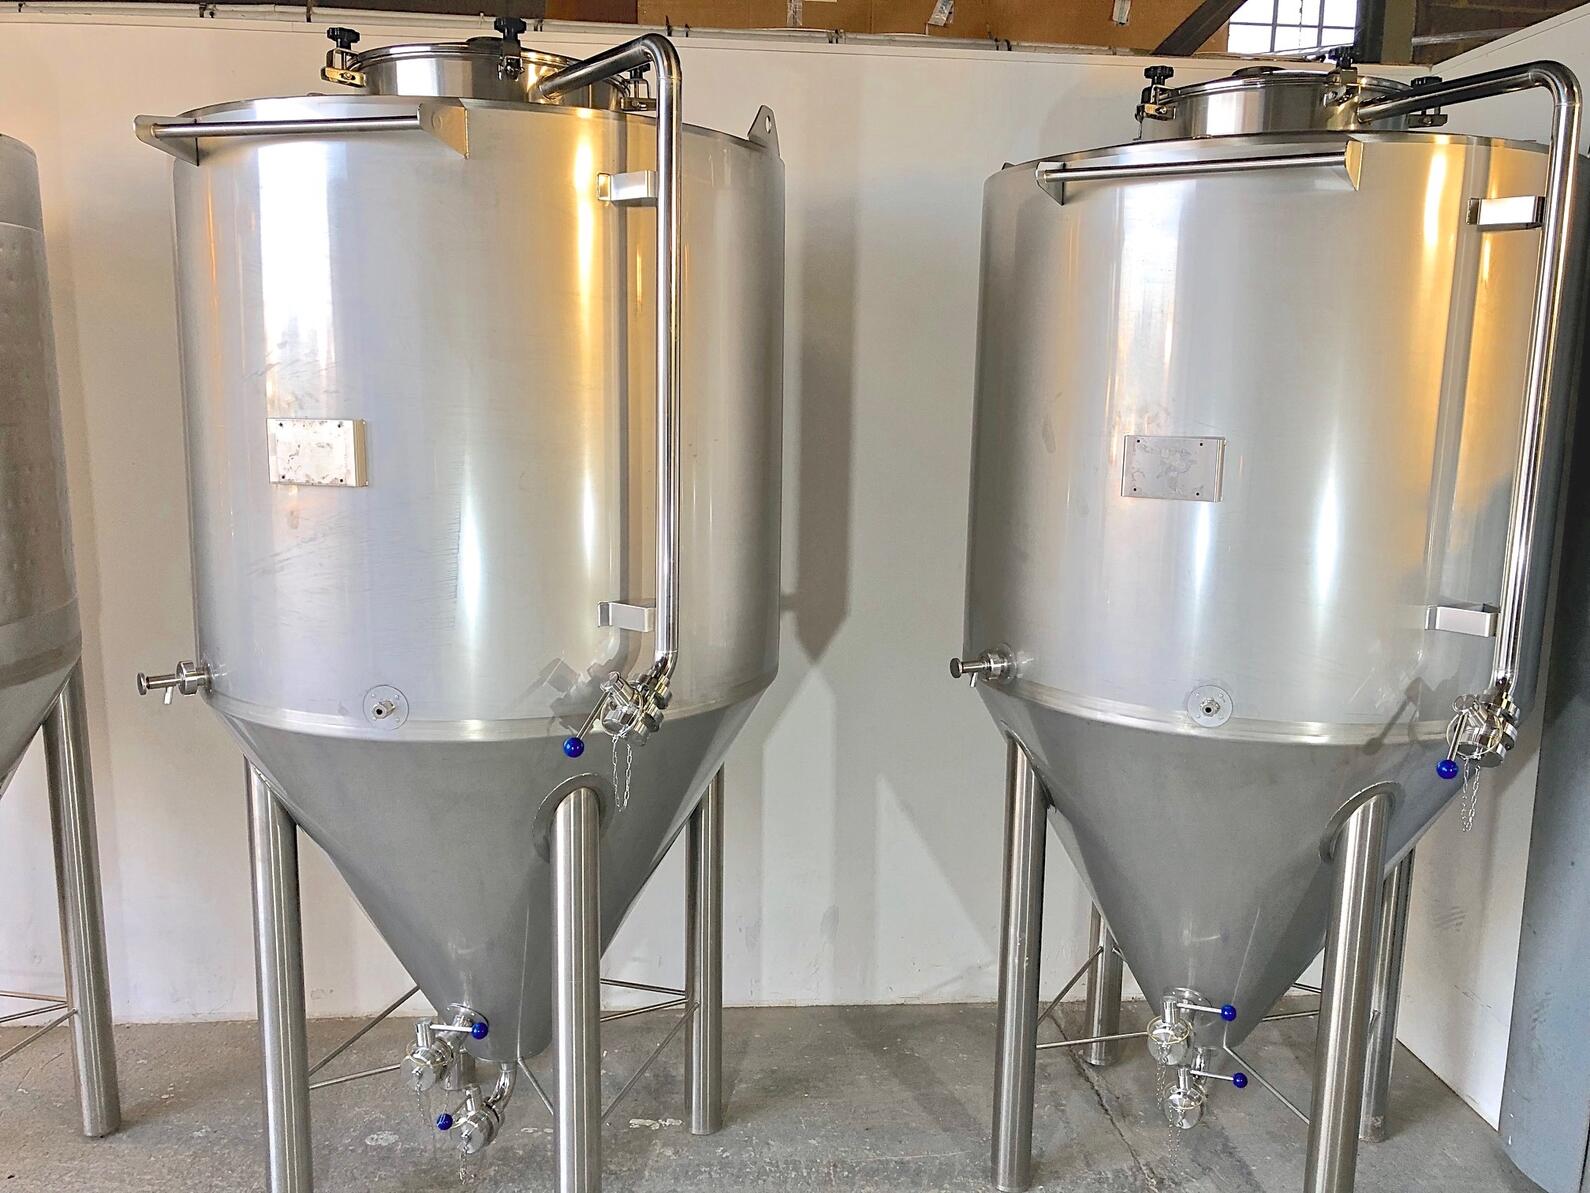 304 stainless steel tank - Cylindro-conical - Isolée - Ceintures de refroidissement